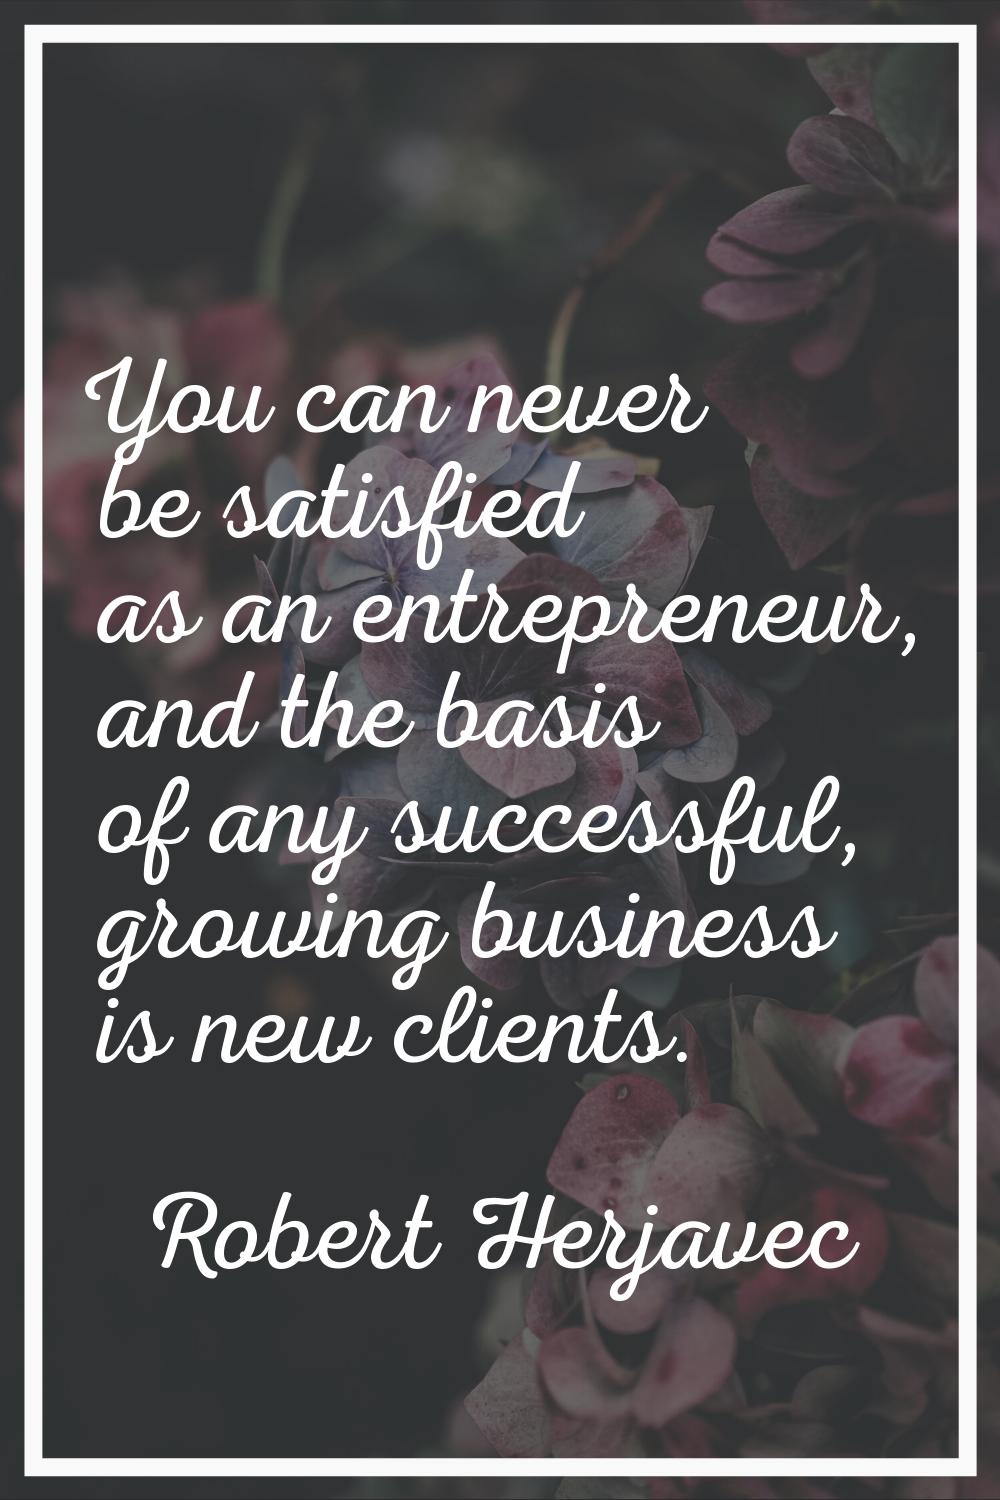 You can never be satisfied as an entrepreneur, and the basis of any successful, growing business is